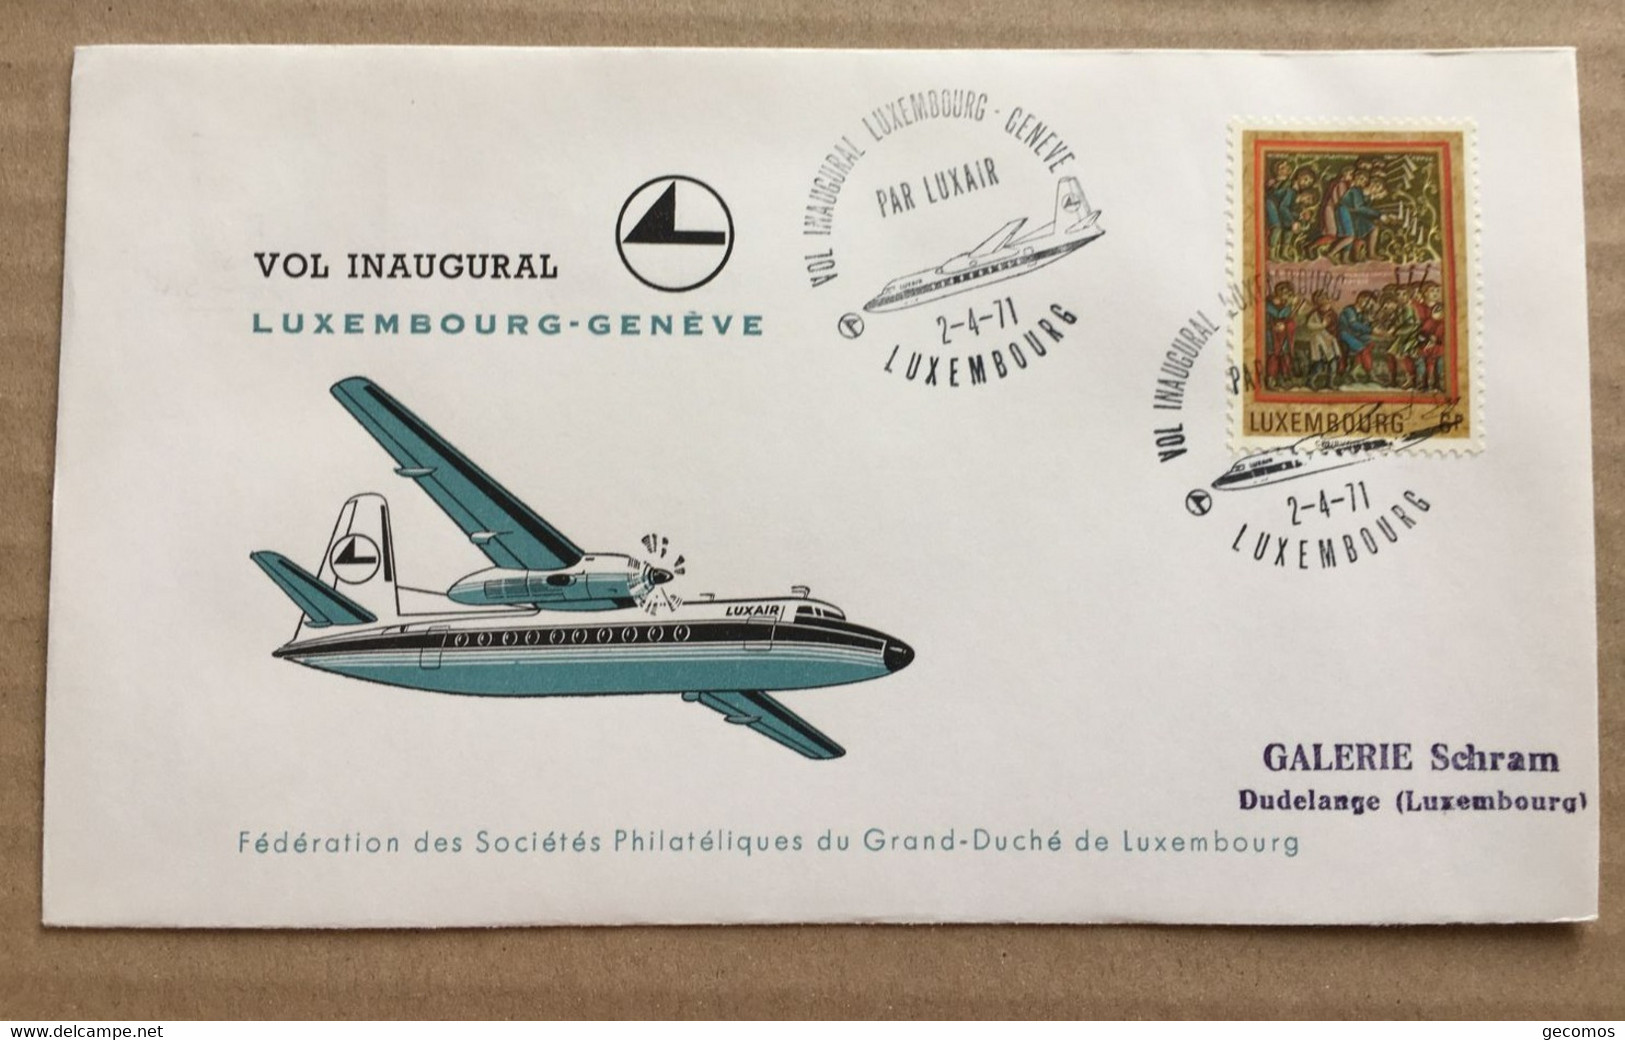 VOL INAUGURAL LUXEMBOURG-GENEVE 2-4-71 - (Avion LUXAIR.) - Covers & Documents